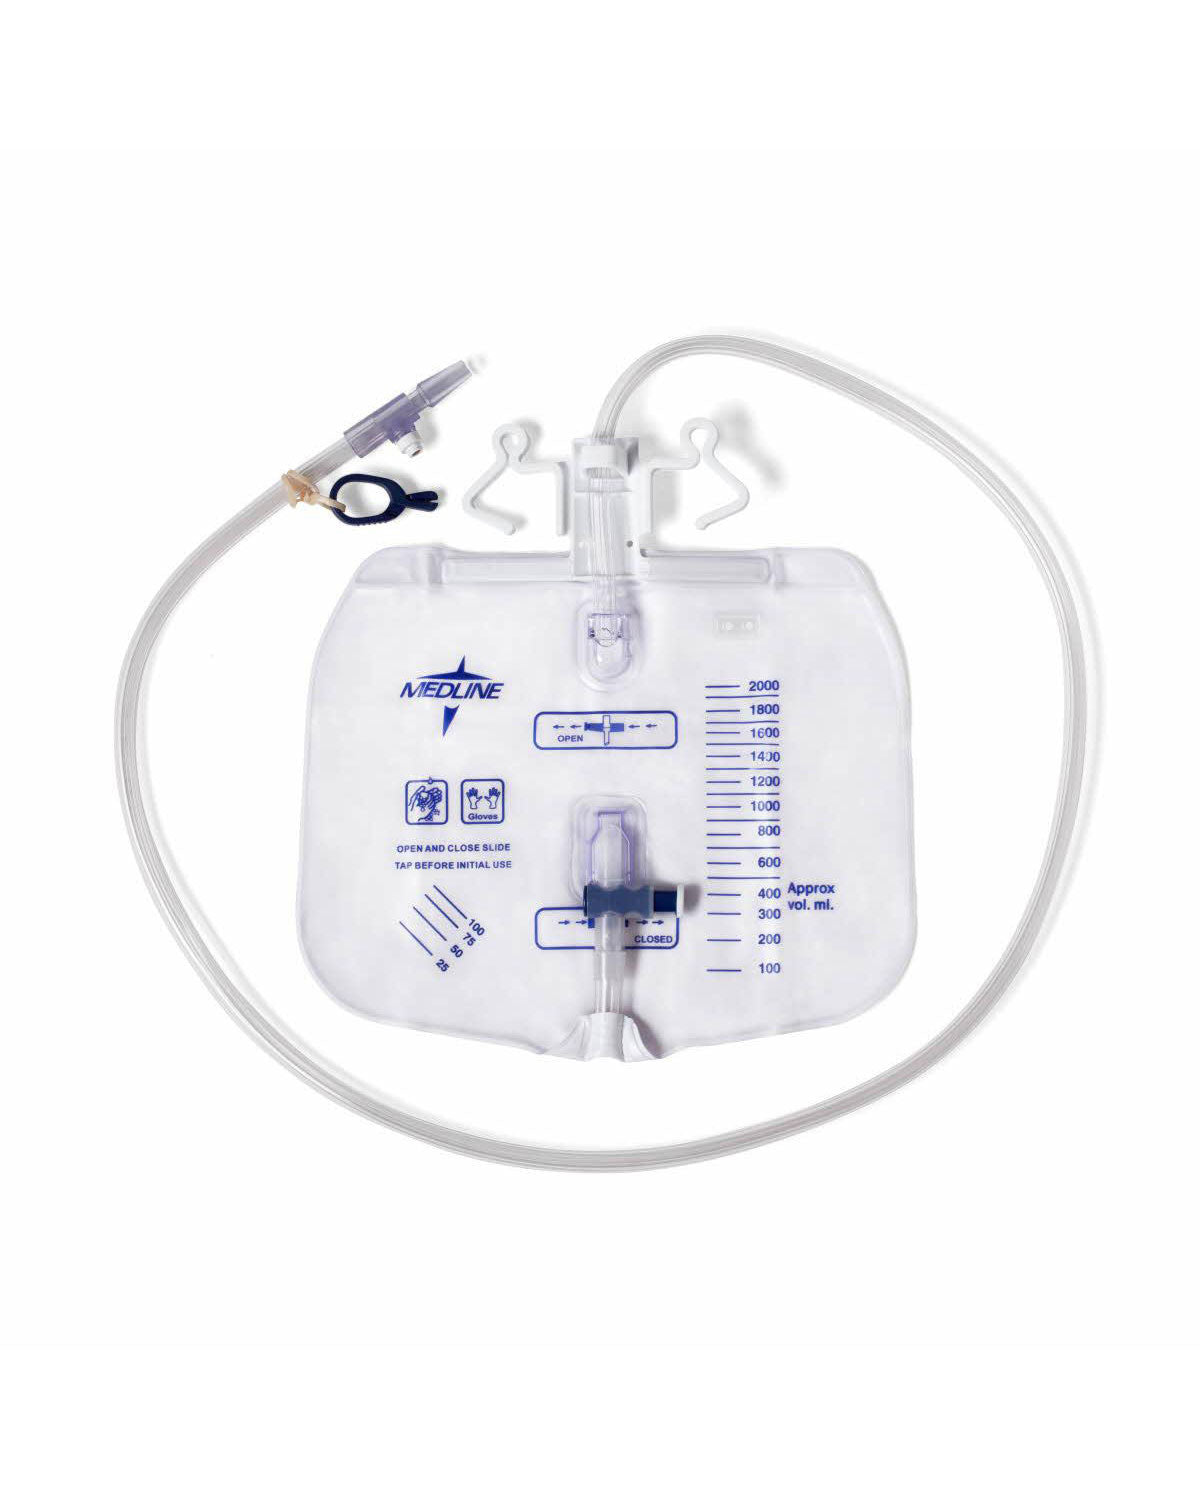 Medline Urinary Drain Bag with Anti Reflux and Slide Tap 2000ml - 1 each